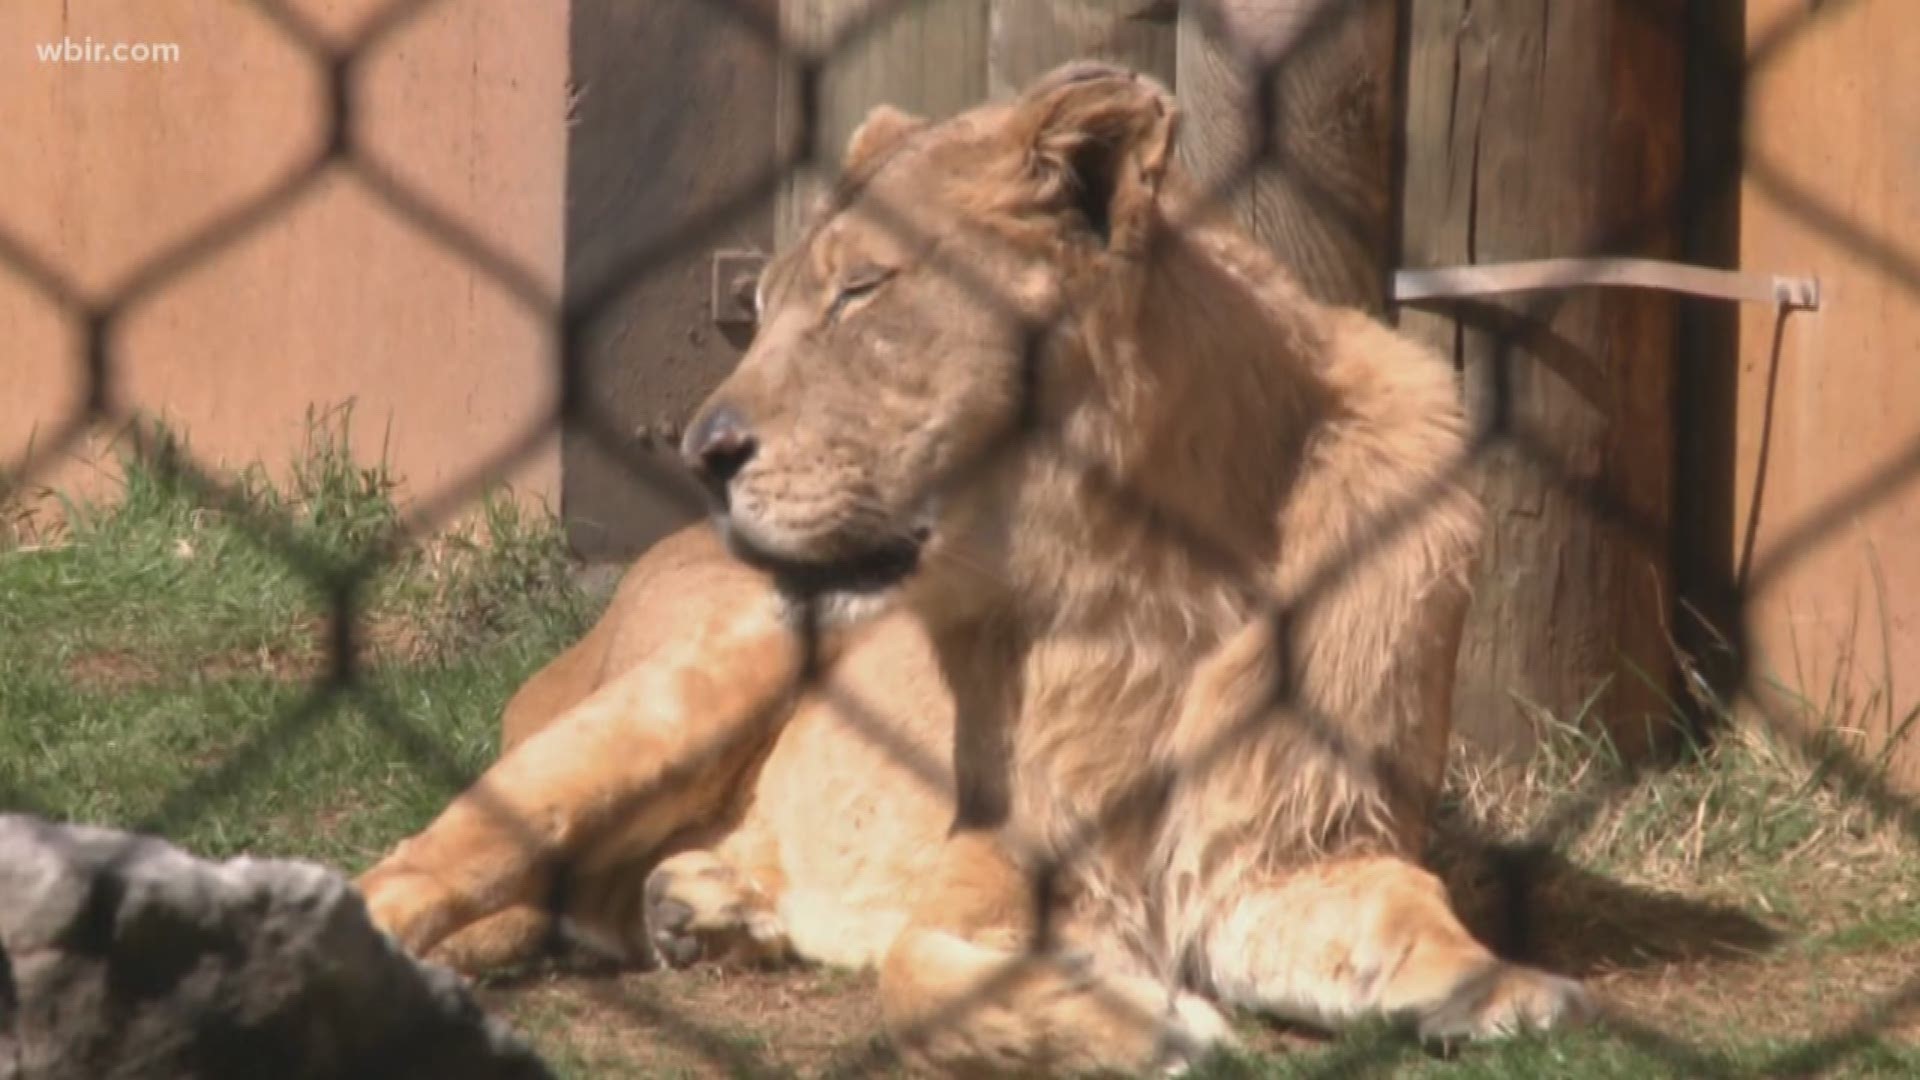 The 23-year-old matriarch of Zoo Knoxville's lion pride has died.